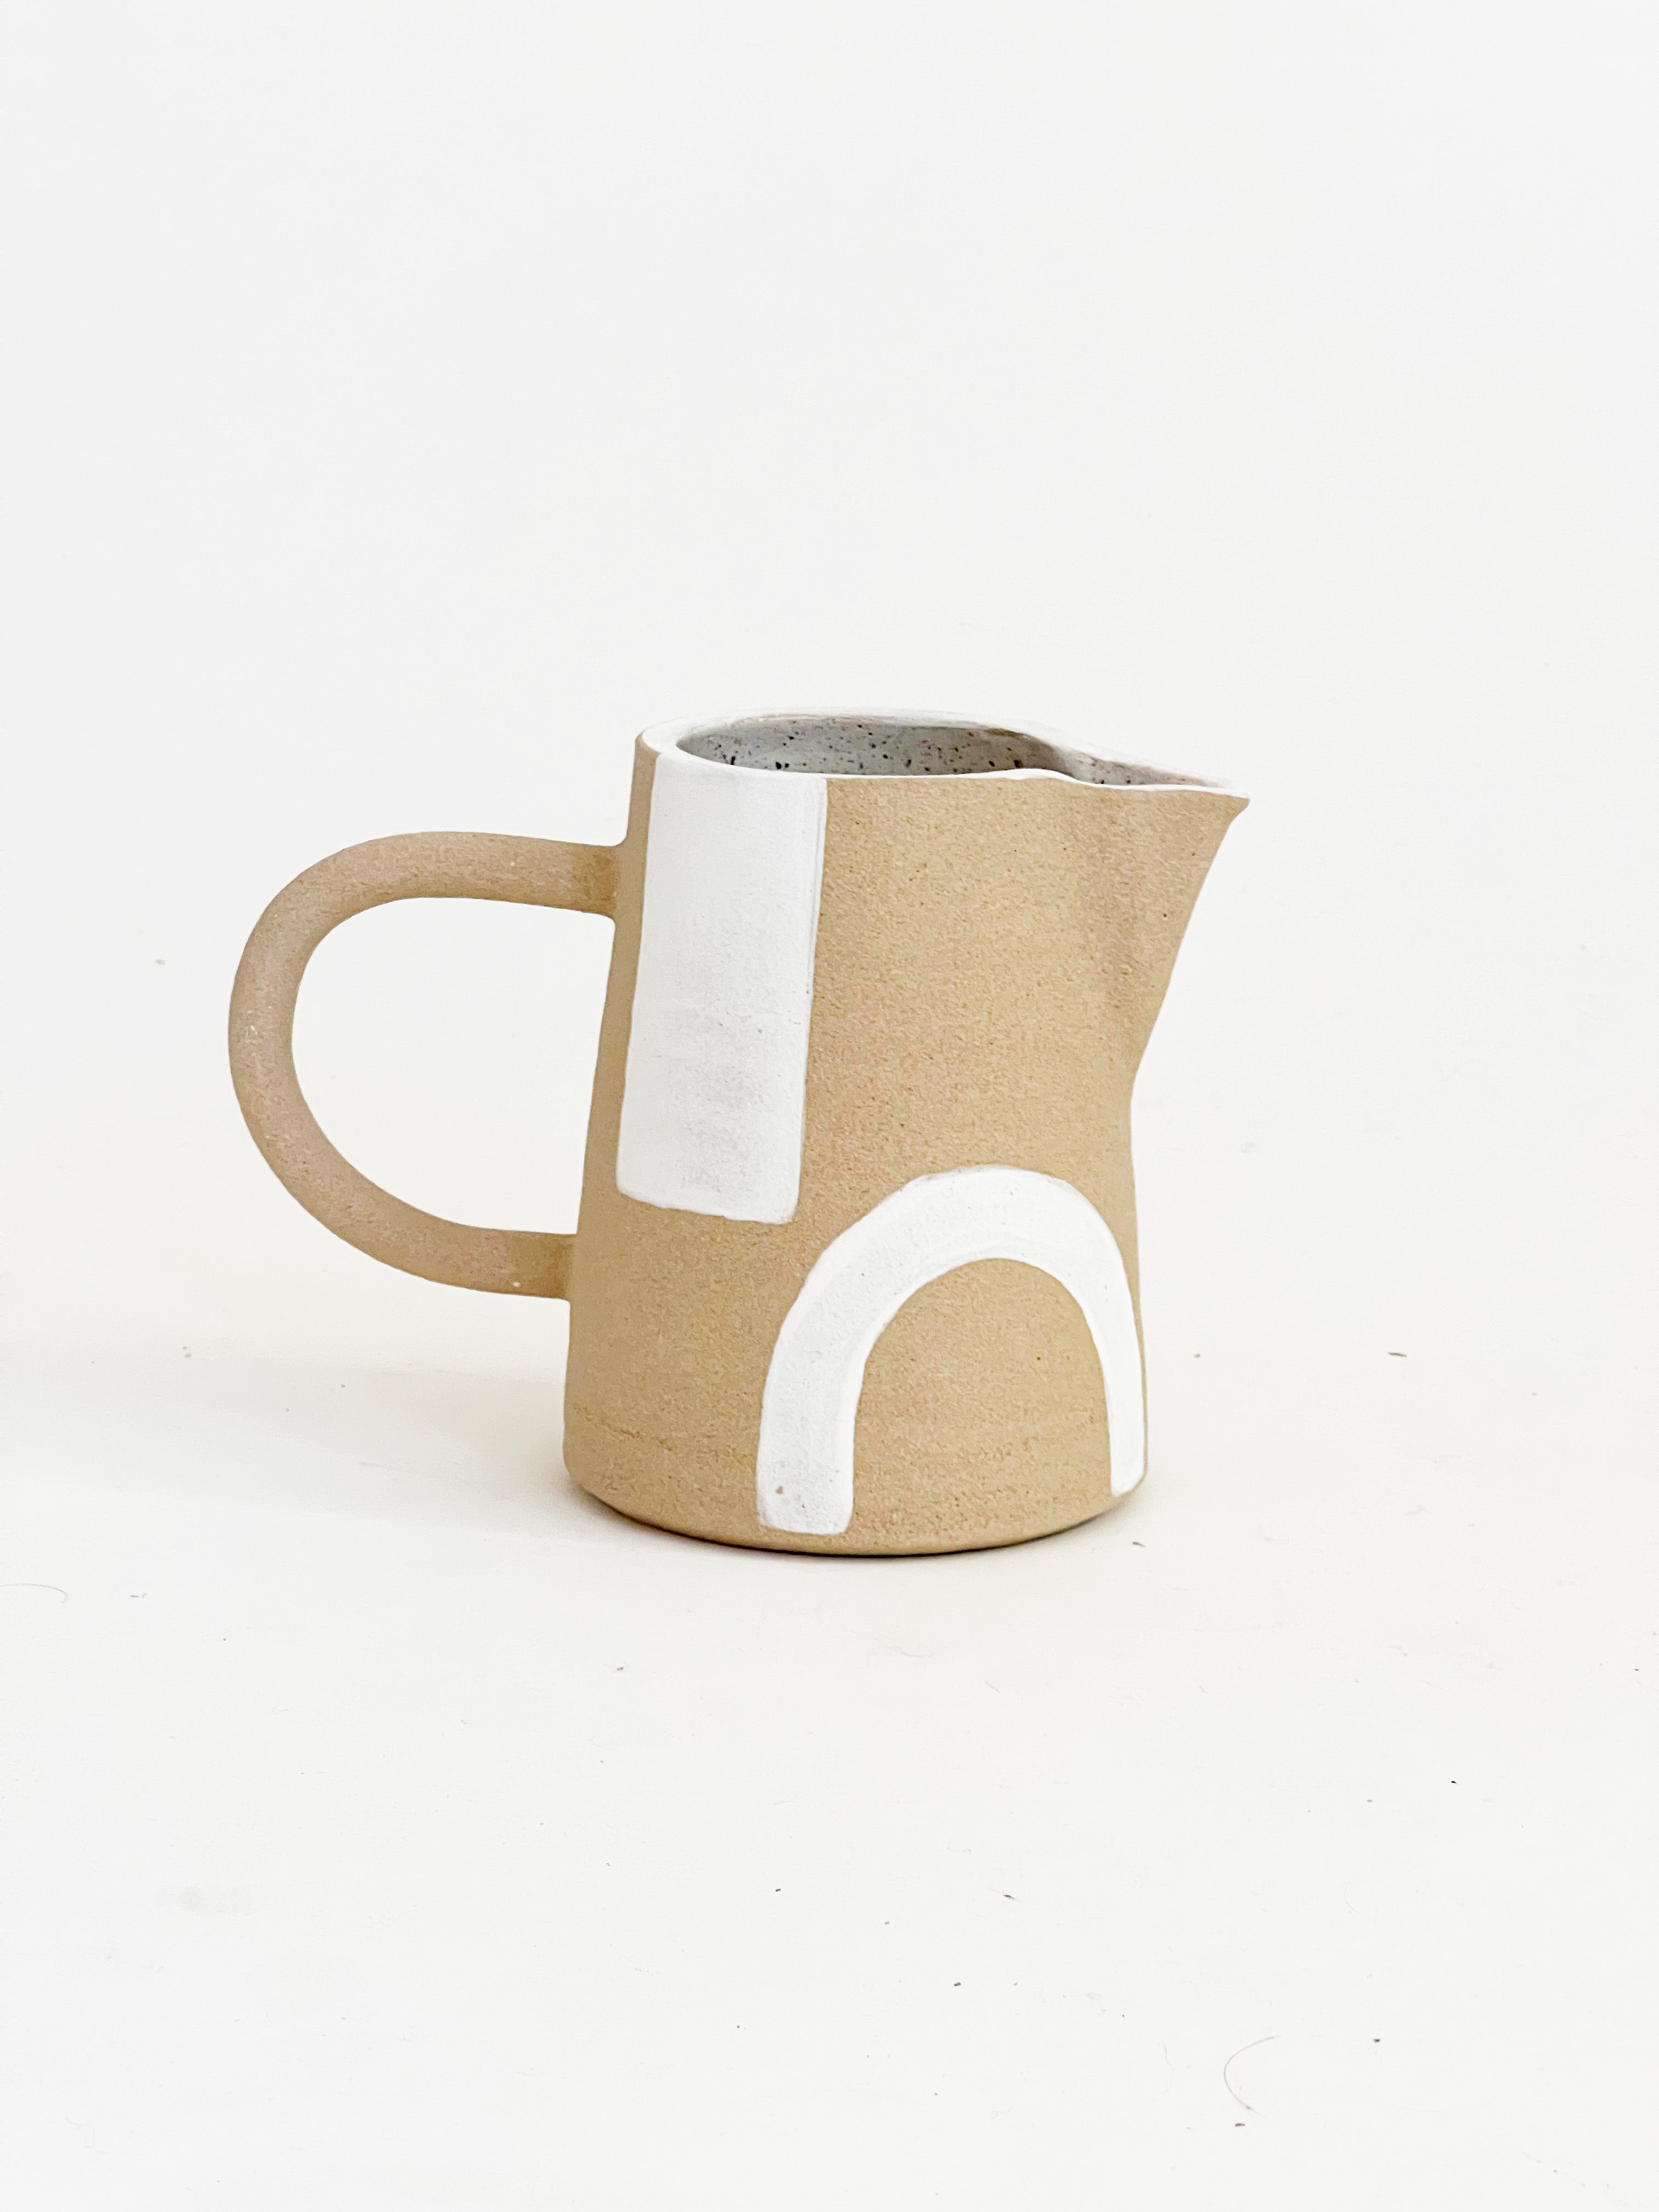 Balanced and Flow White Pitcher Set